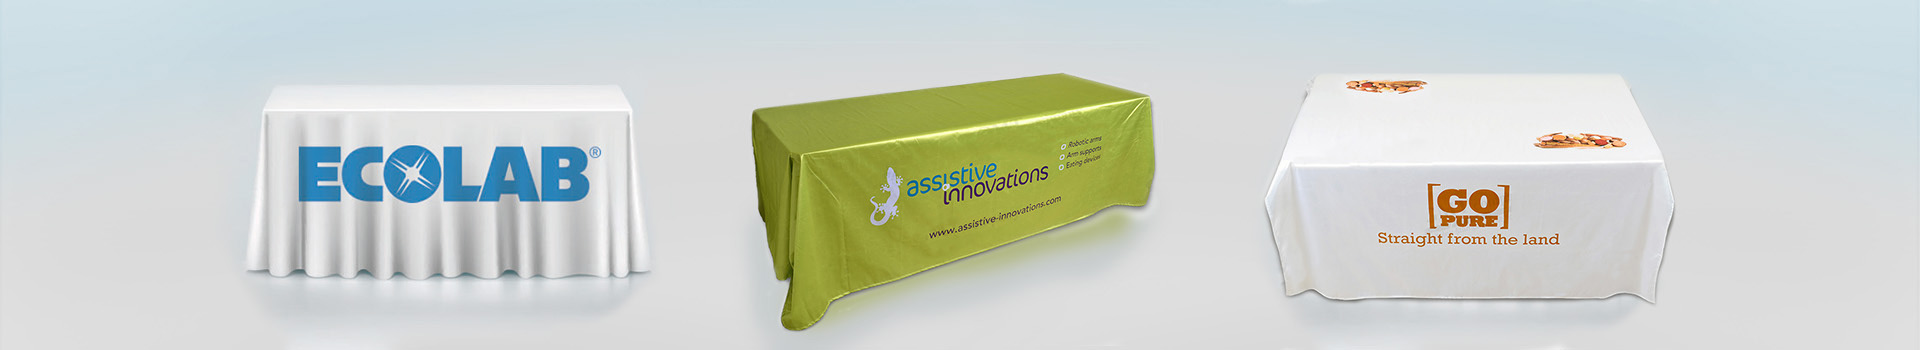 Advertising Tablecloth – Table Cover